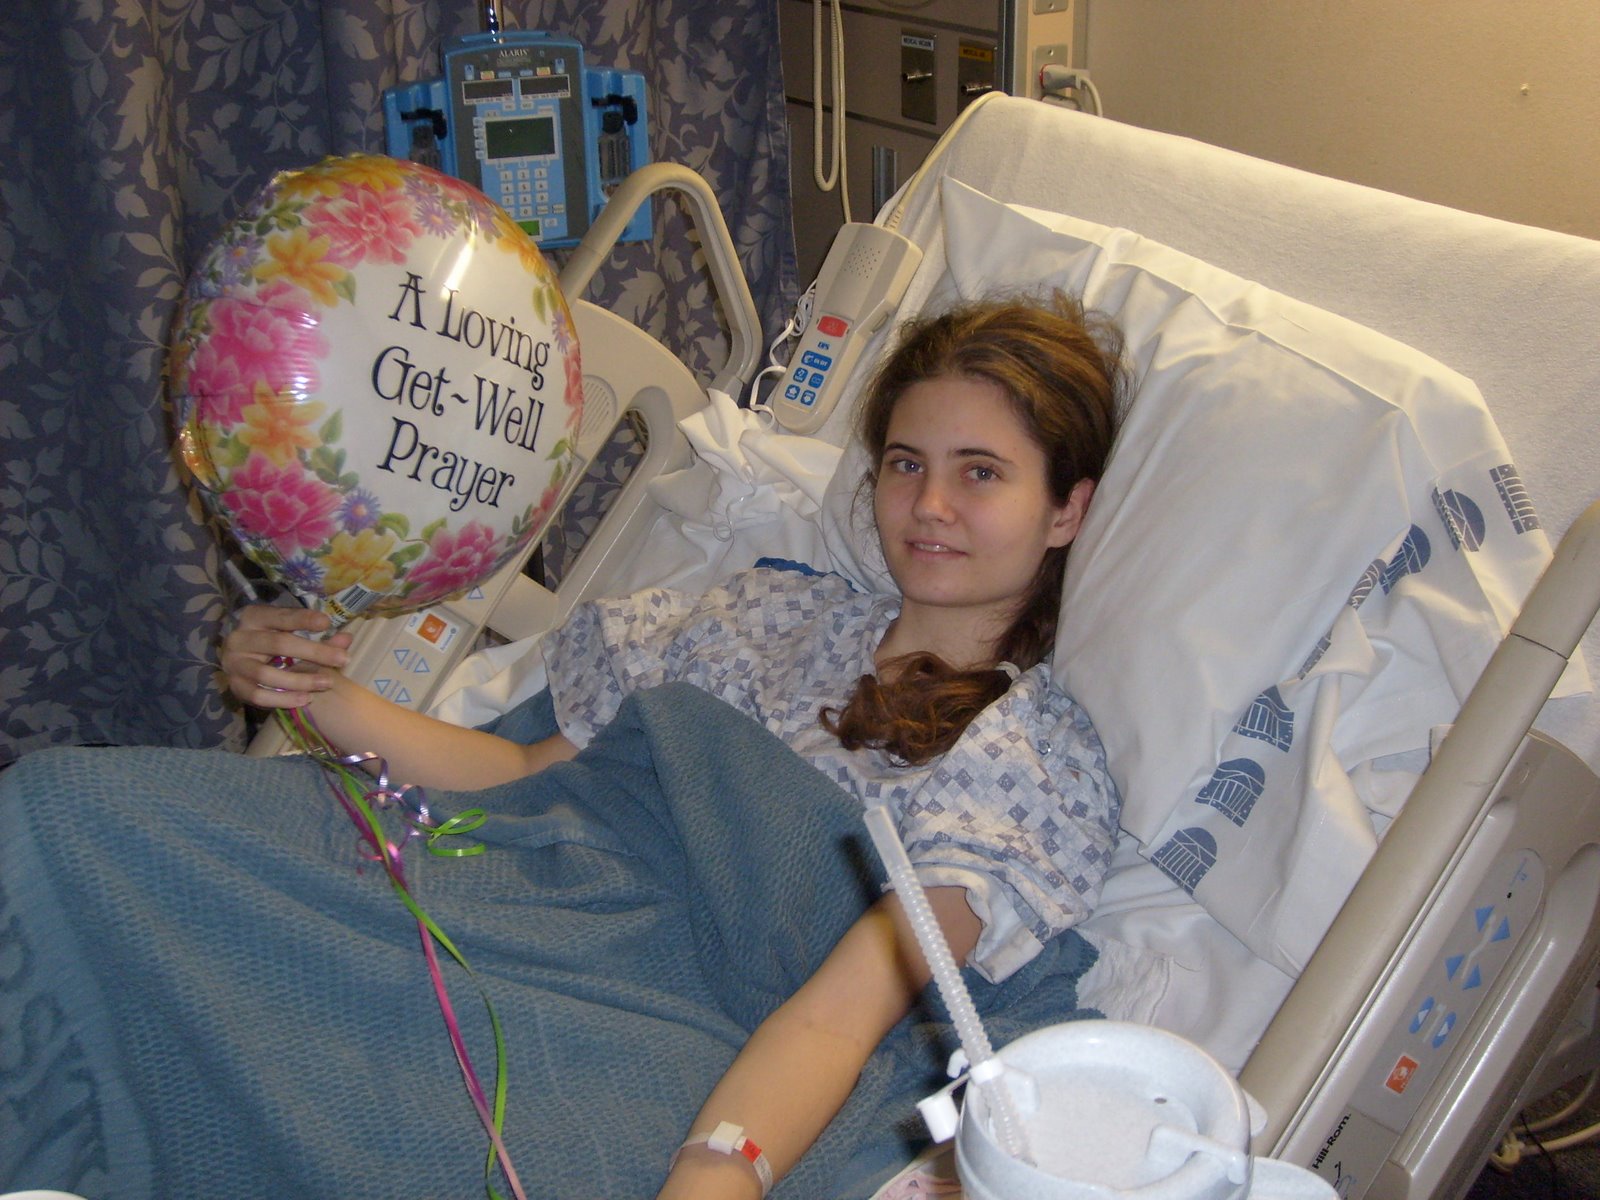 [Heather+at+hospital+with+a+get+well+balloon.JPG]